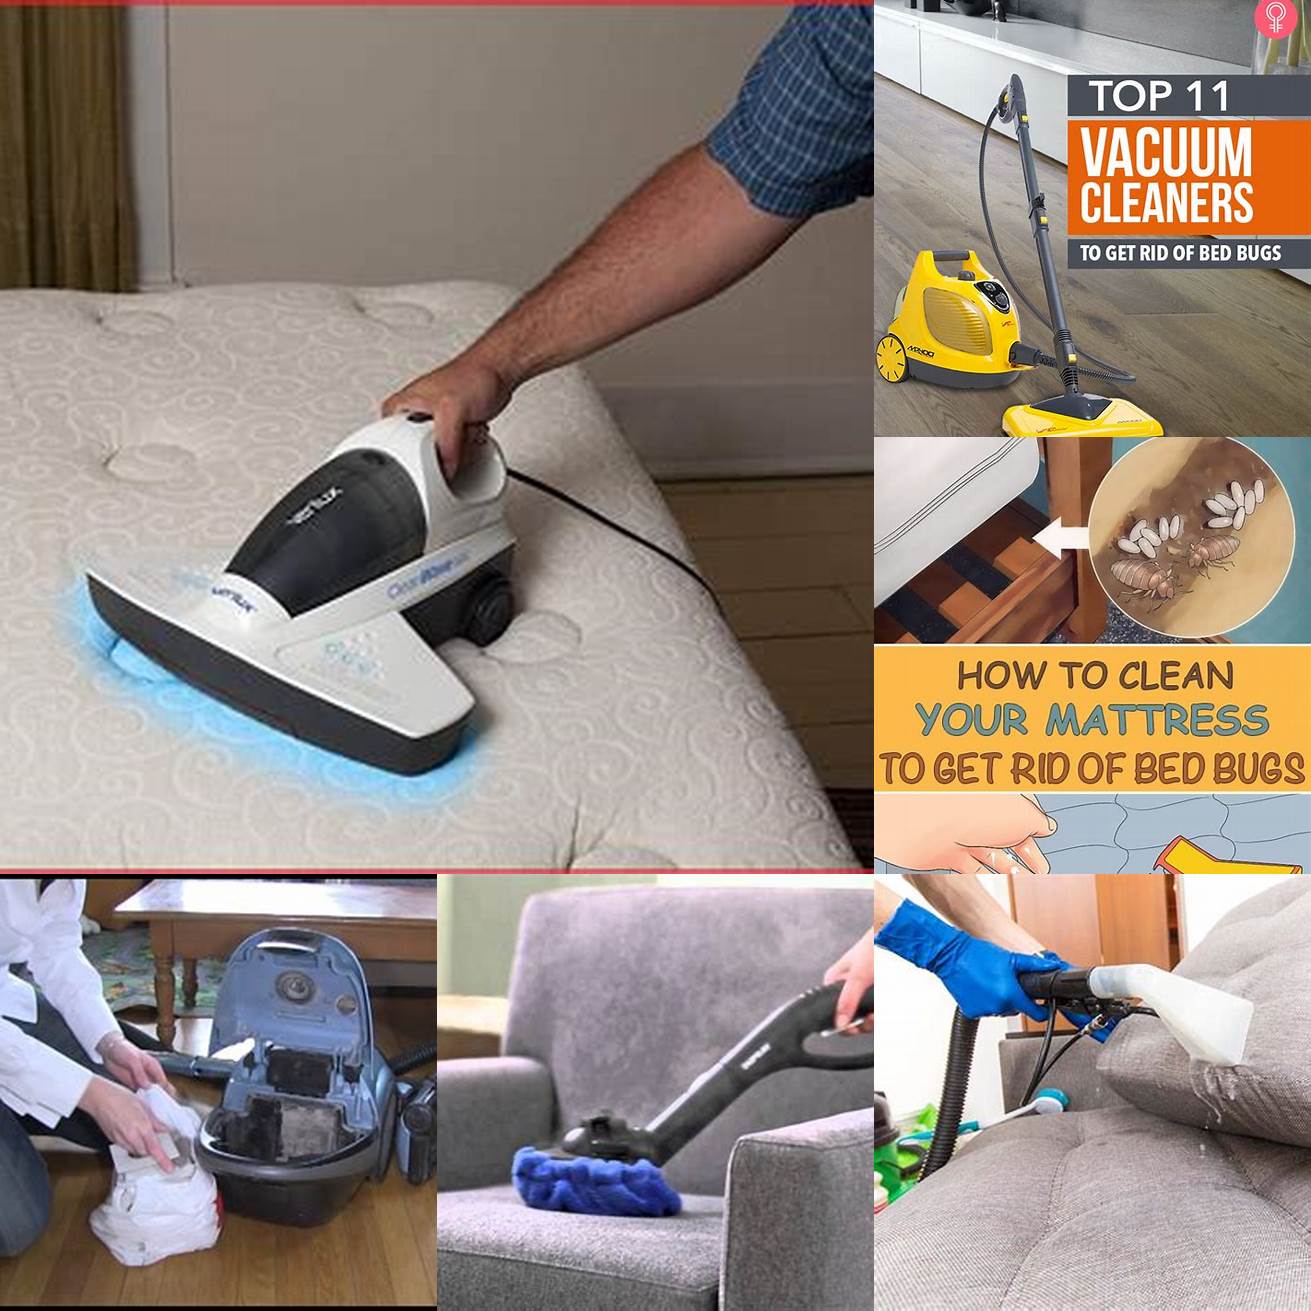 Using a Vacuum Cleaner to Remove Bugs